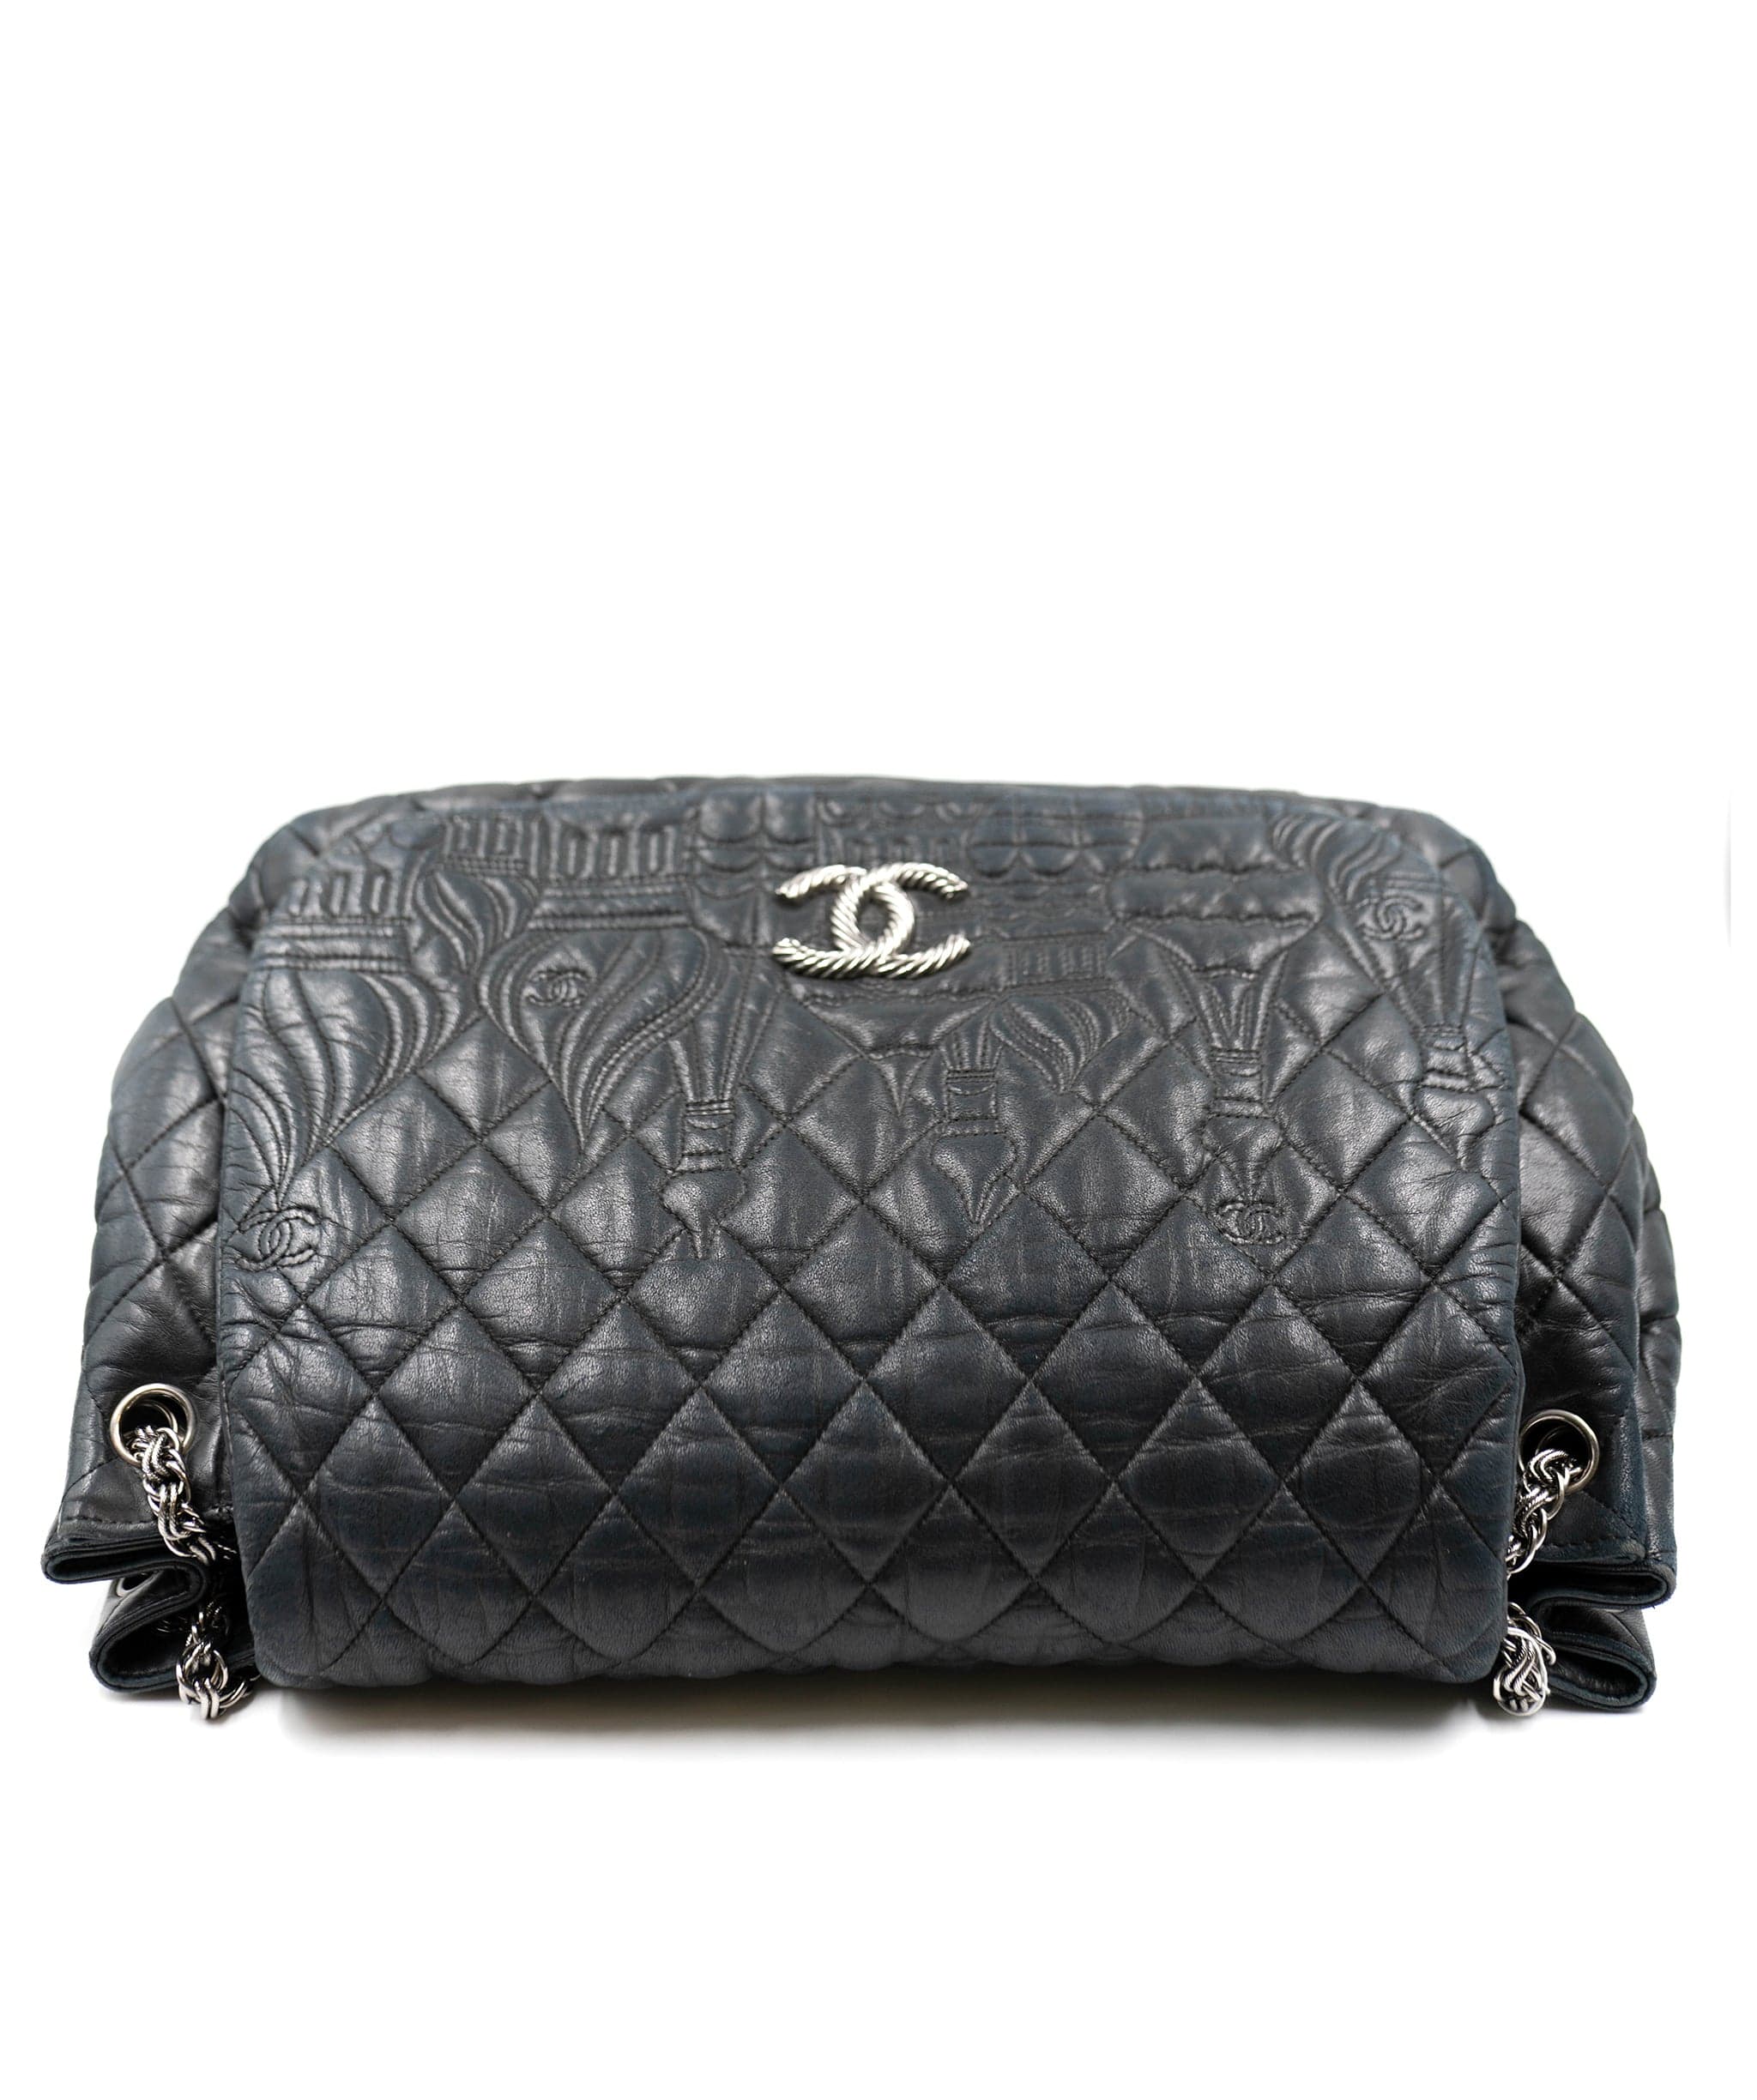 Chanel Chanel Moscow Paris Bag  ALL0073